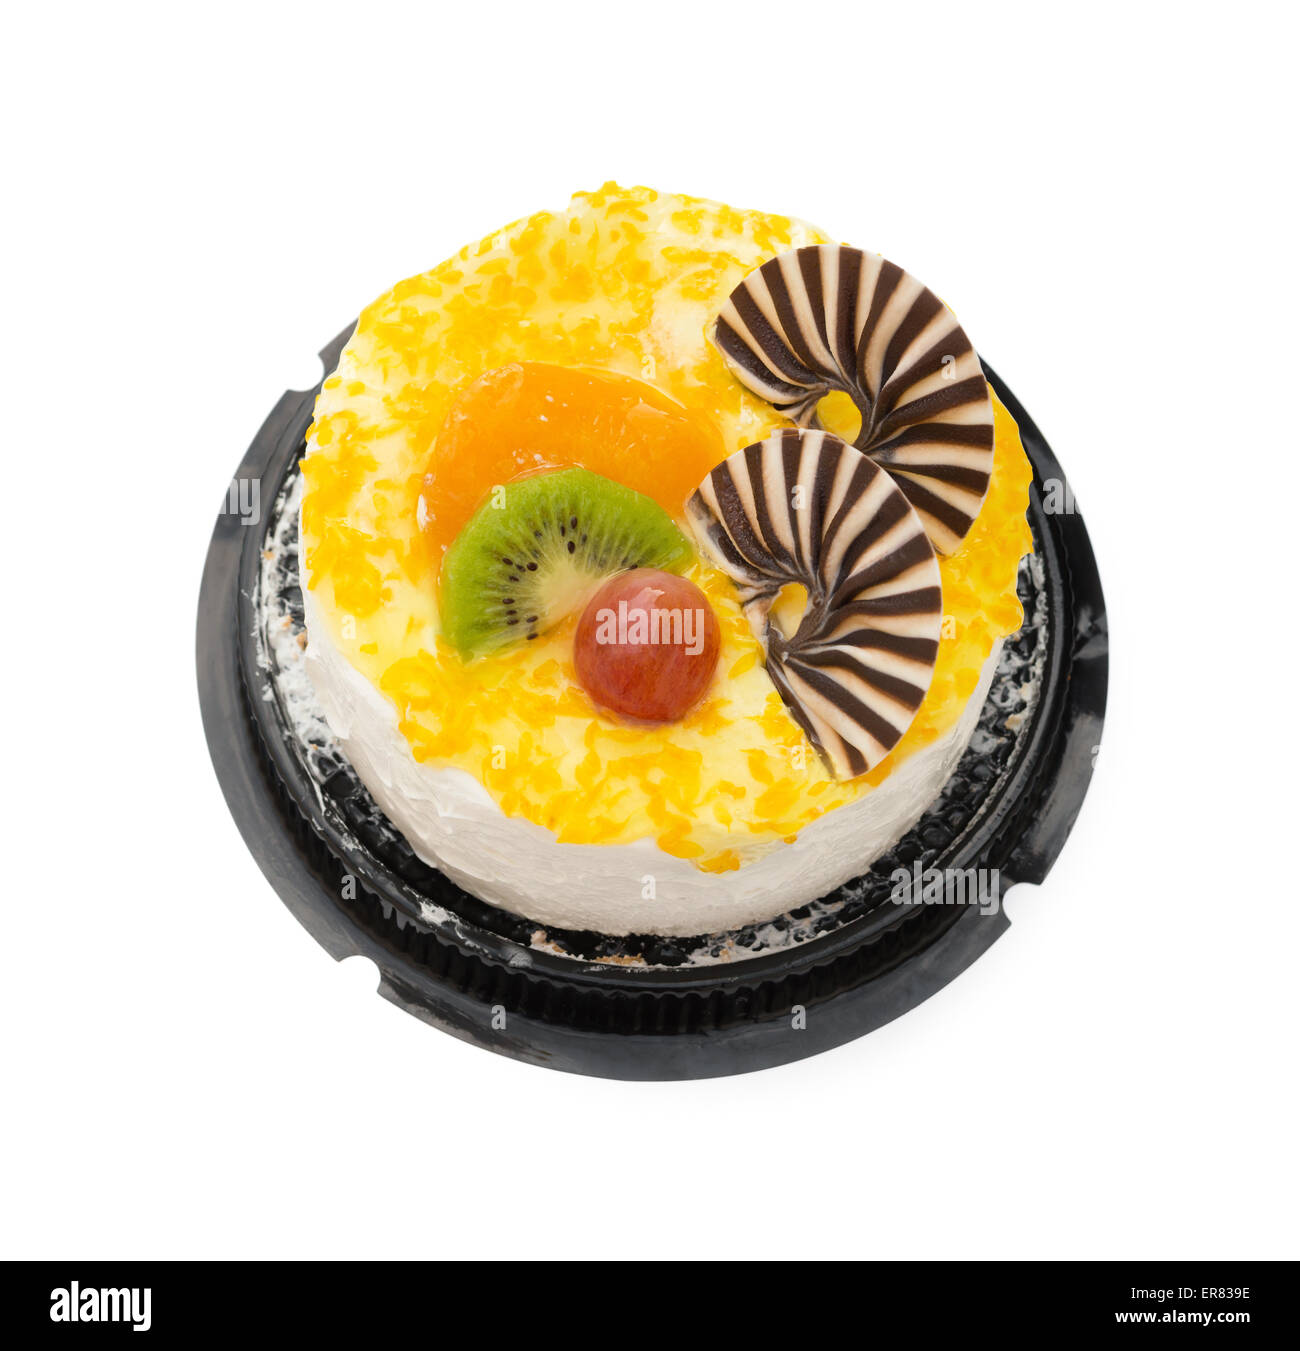 top view yummy cake on white with grape orange kiwifruit and chocolate on top, clipping path included Stock Photo